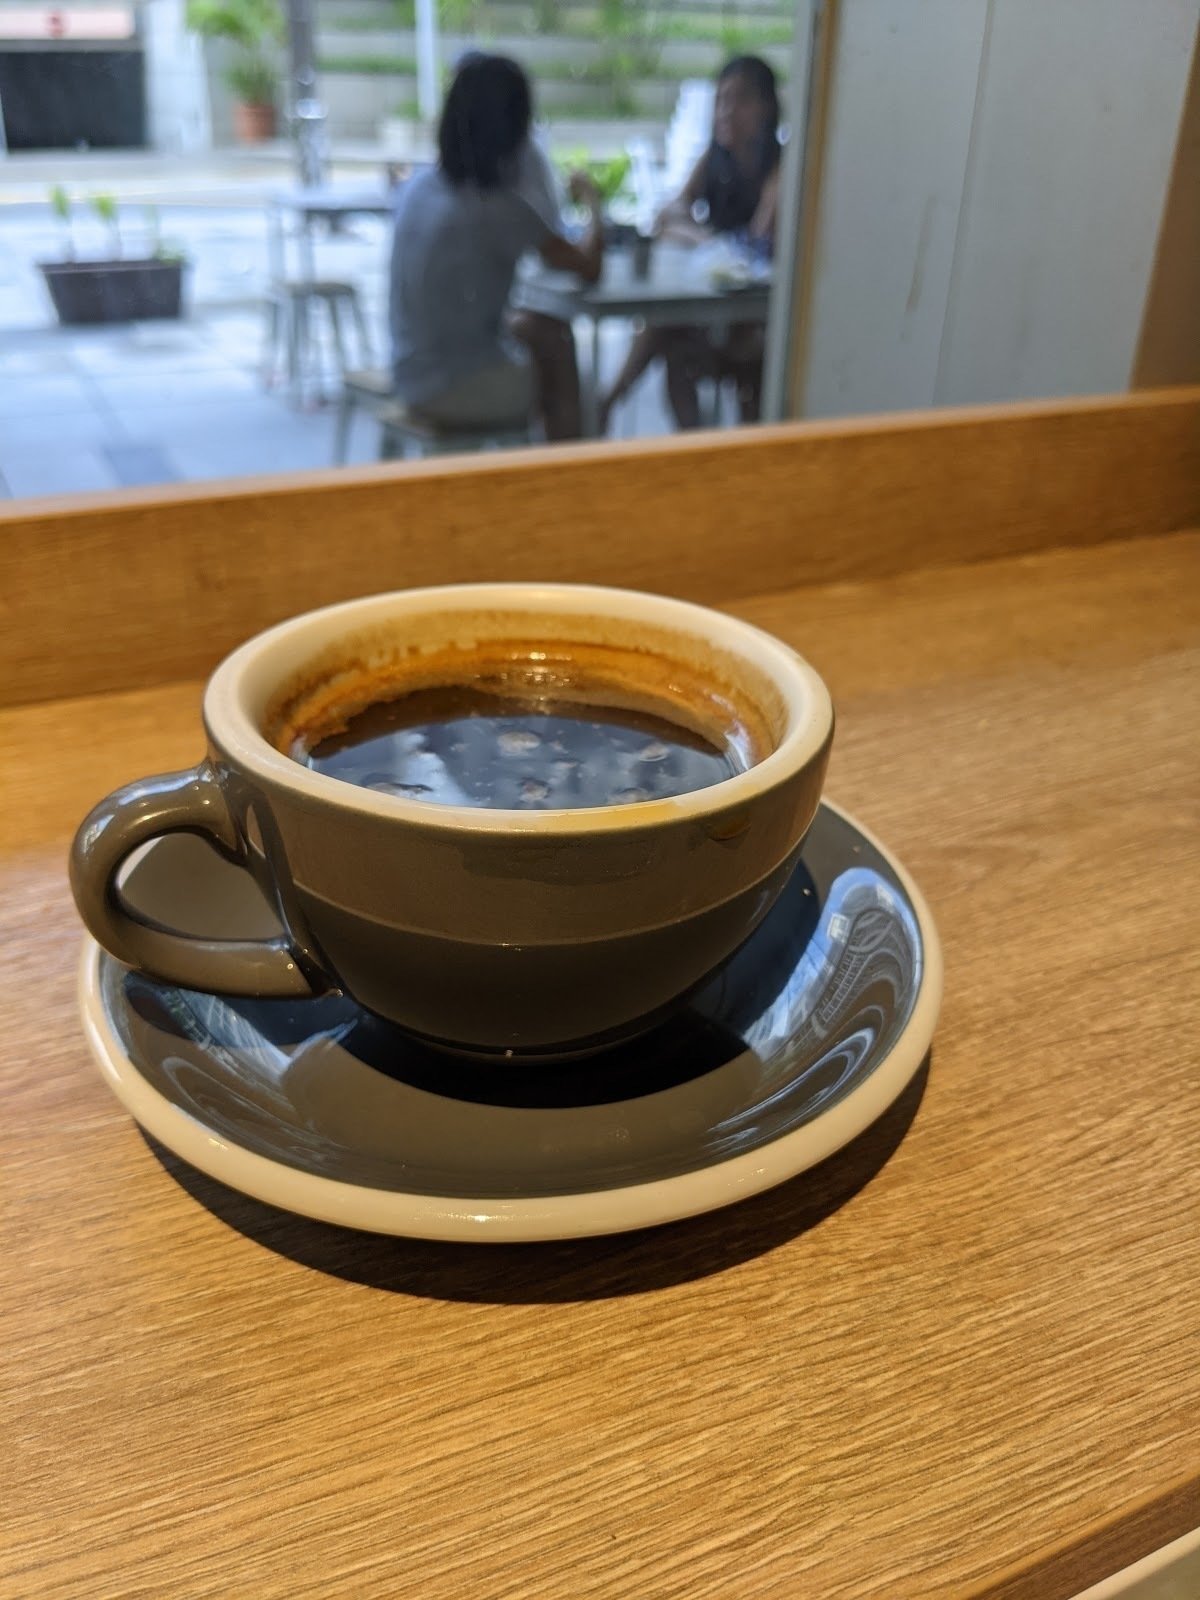 <span class="translation_missing" title="translation missing: en.meta.location_title, location_name: Dutch Colony Coffee Co. @ UE Square, city: Singapore">Location Title</span>